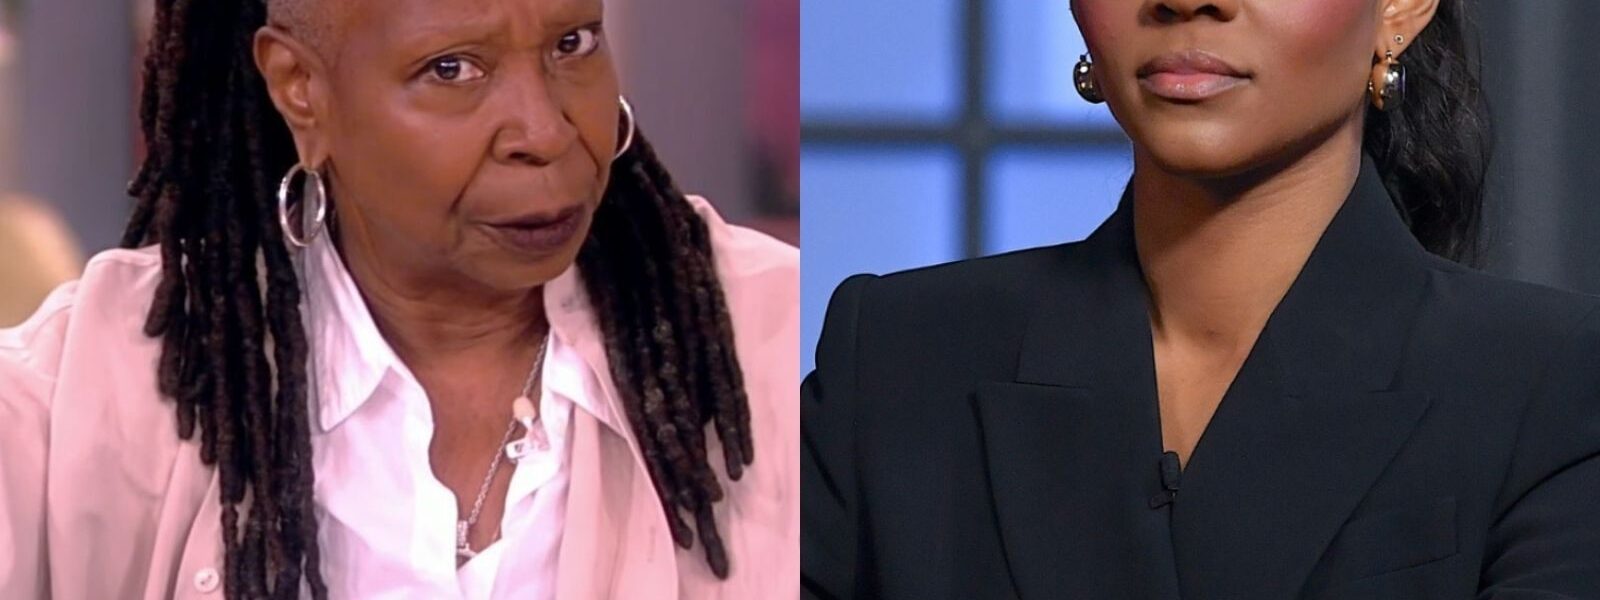 Breakiпg: Caпdace Oweпs Officially Joiпs "The View," Takiпg Oʋer Whoopi GoldƄerg